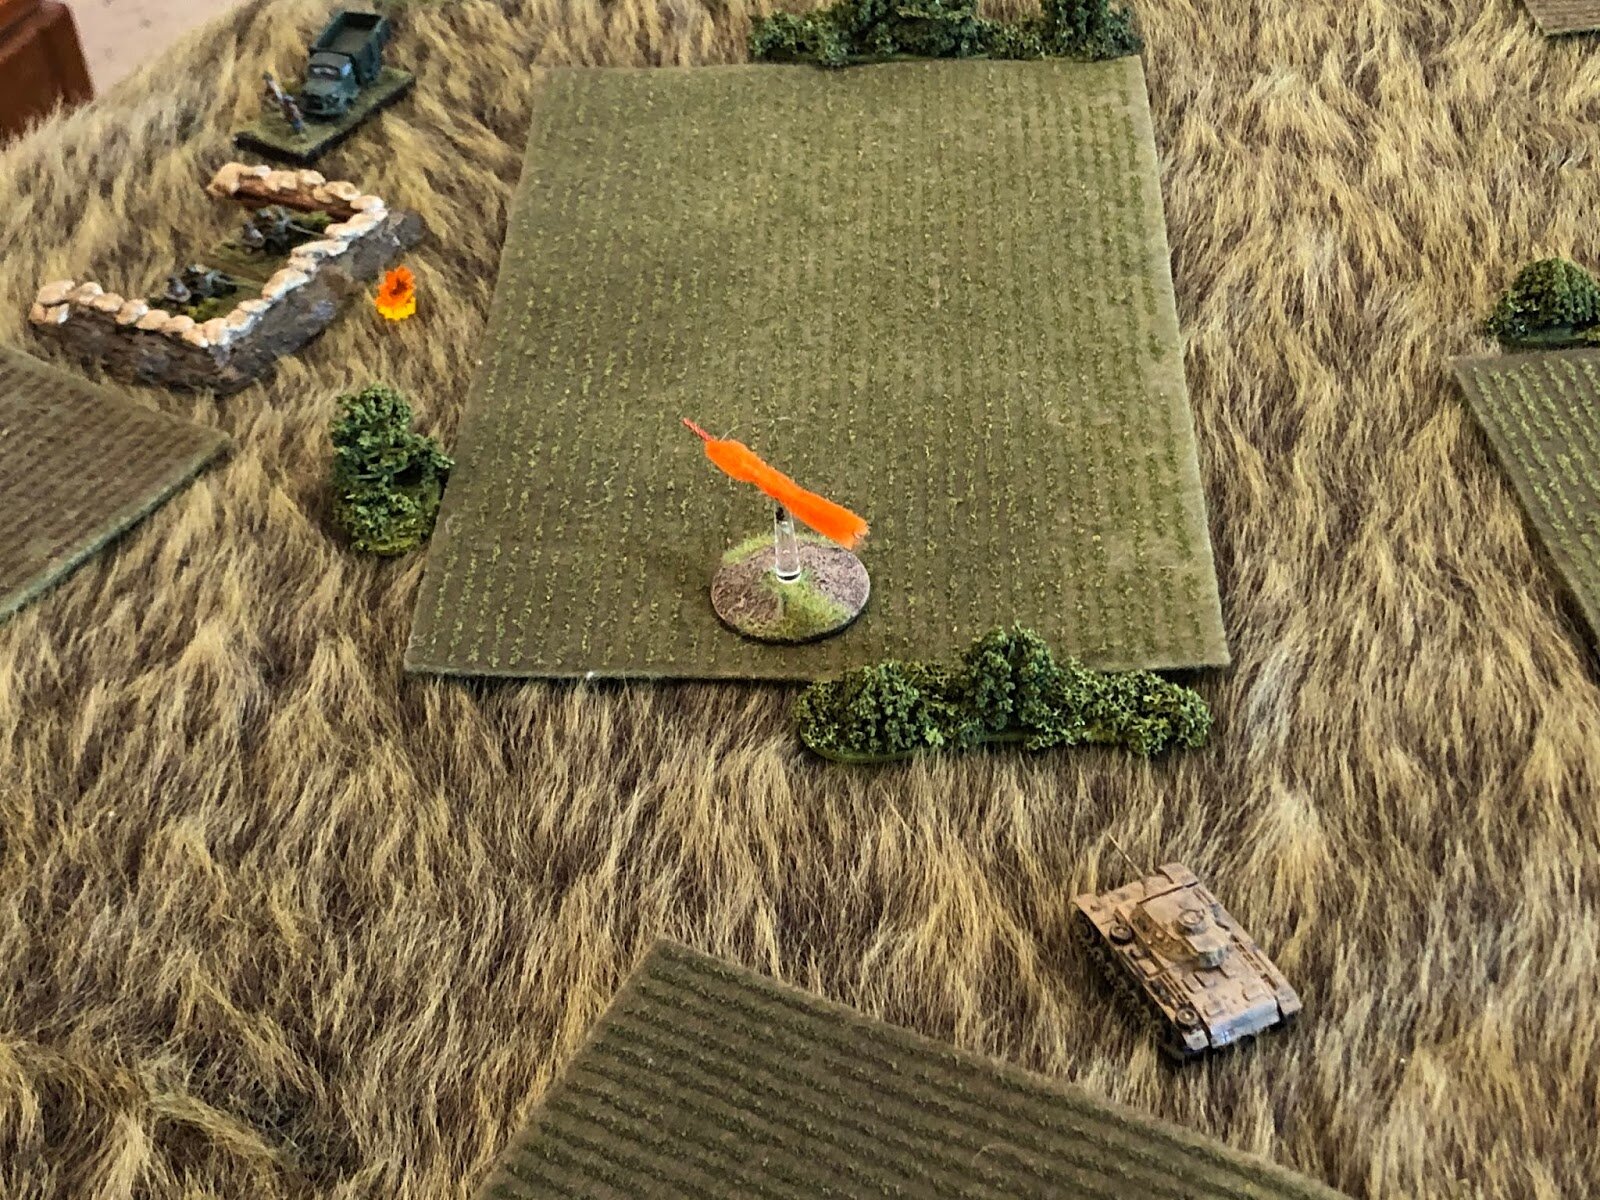 Trying bravely to alleviate the pressure on the left, the 2nd Pz Plt Commander continues pushing his tank straight at the South ATG position, firing as he goes with his cannon and MGs...